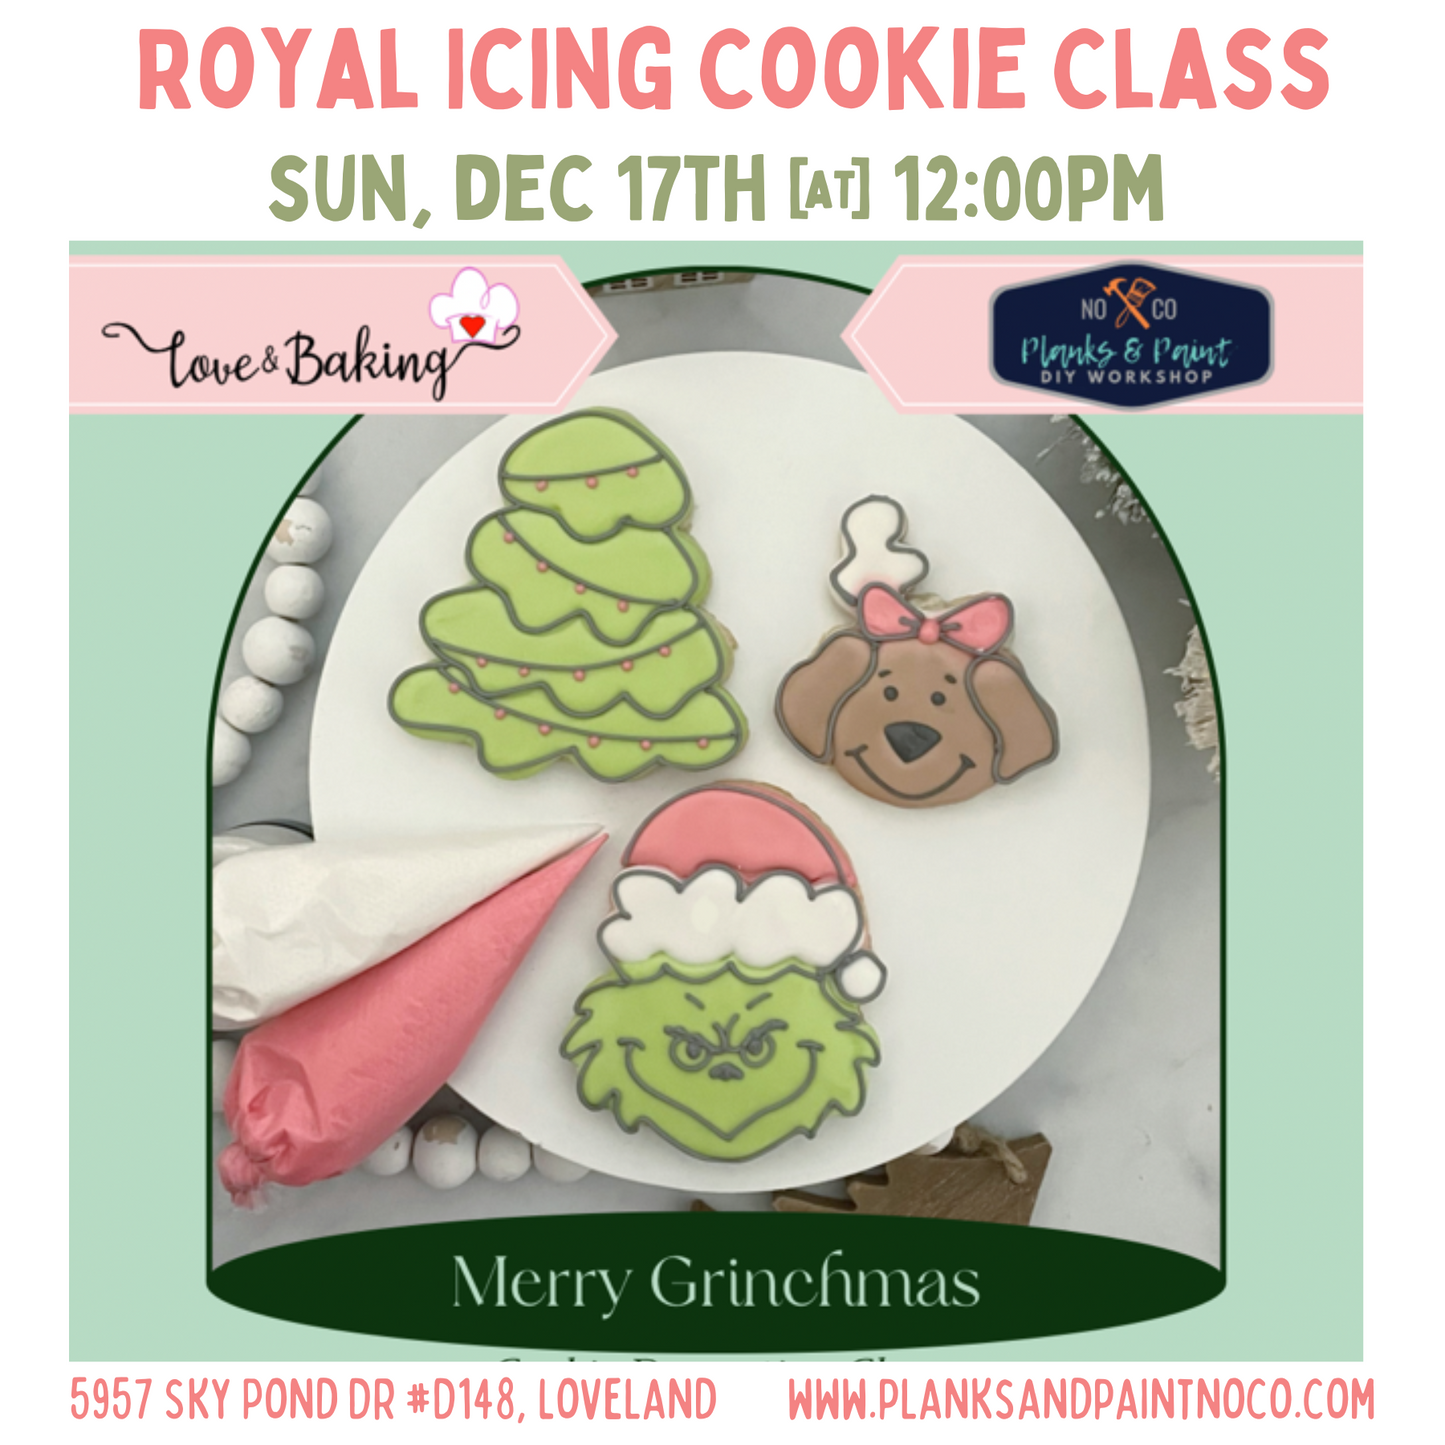 Merry Grinchmas Royal Icing Cookie Decorating Class